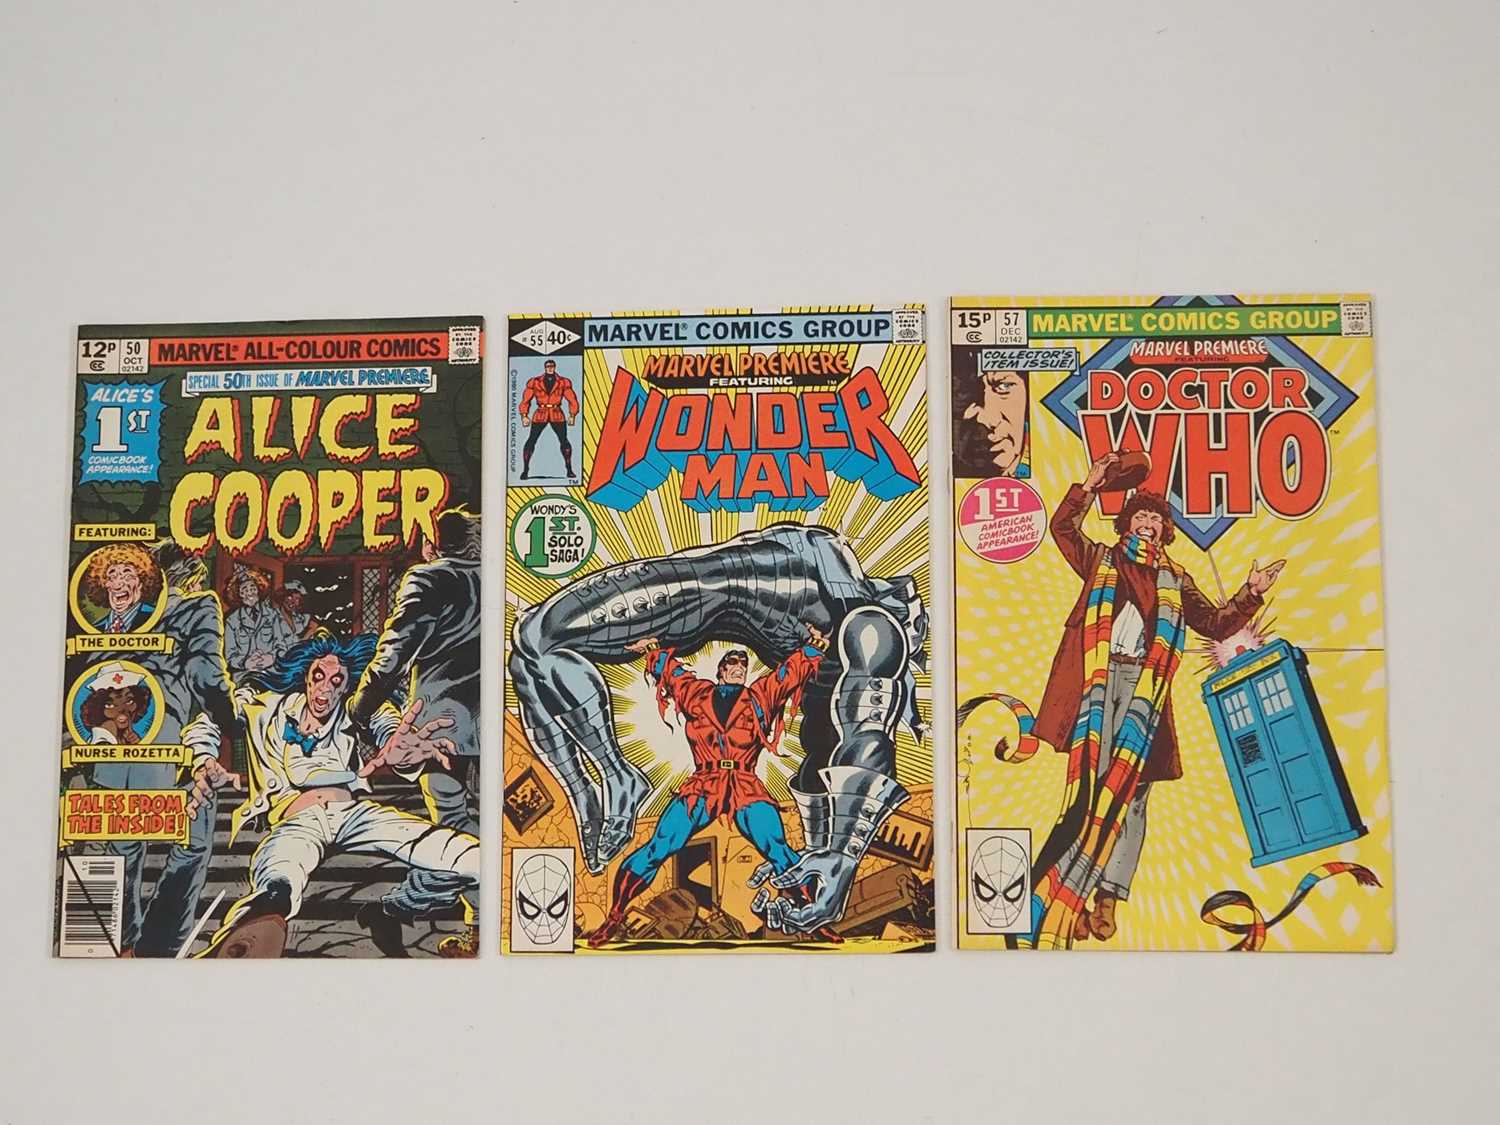 MARVEL PREMIERE #50, 55, 57 (3 in Lot) - (1979/1980 - MARVEL - US & UK Price Variant) - Includes the